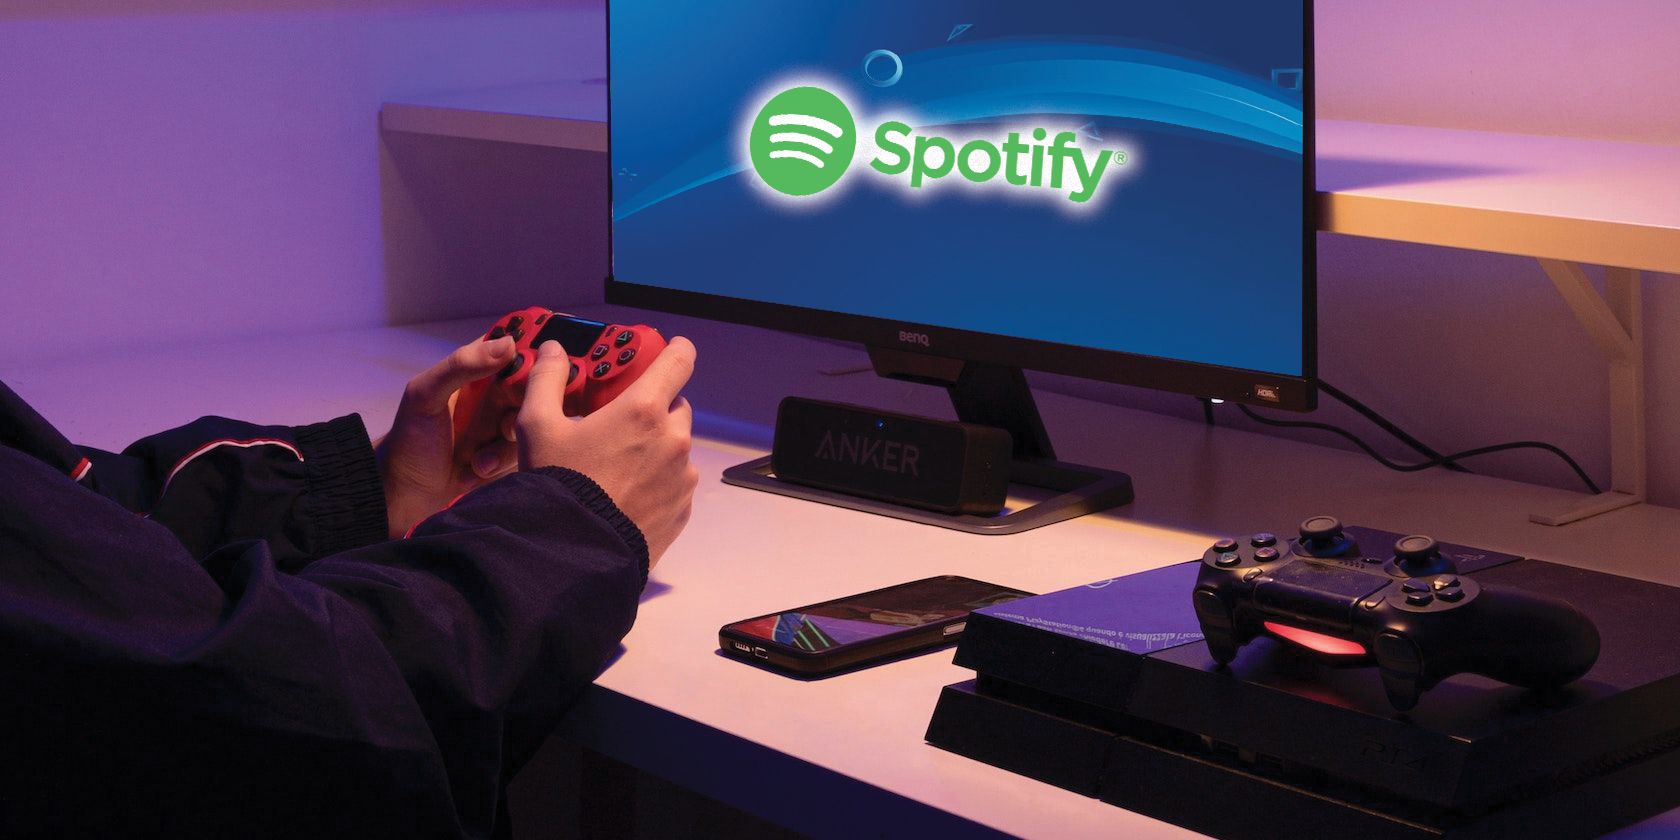 slot ideologi mirakel How to Use Spotify on Your PS4 While You Game